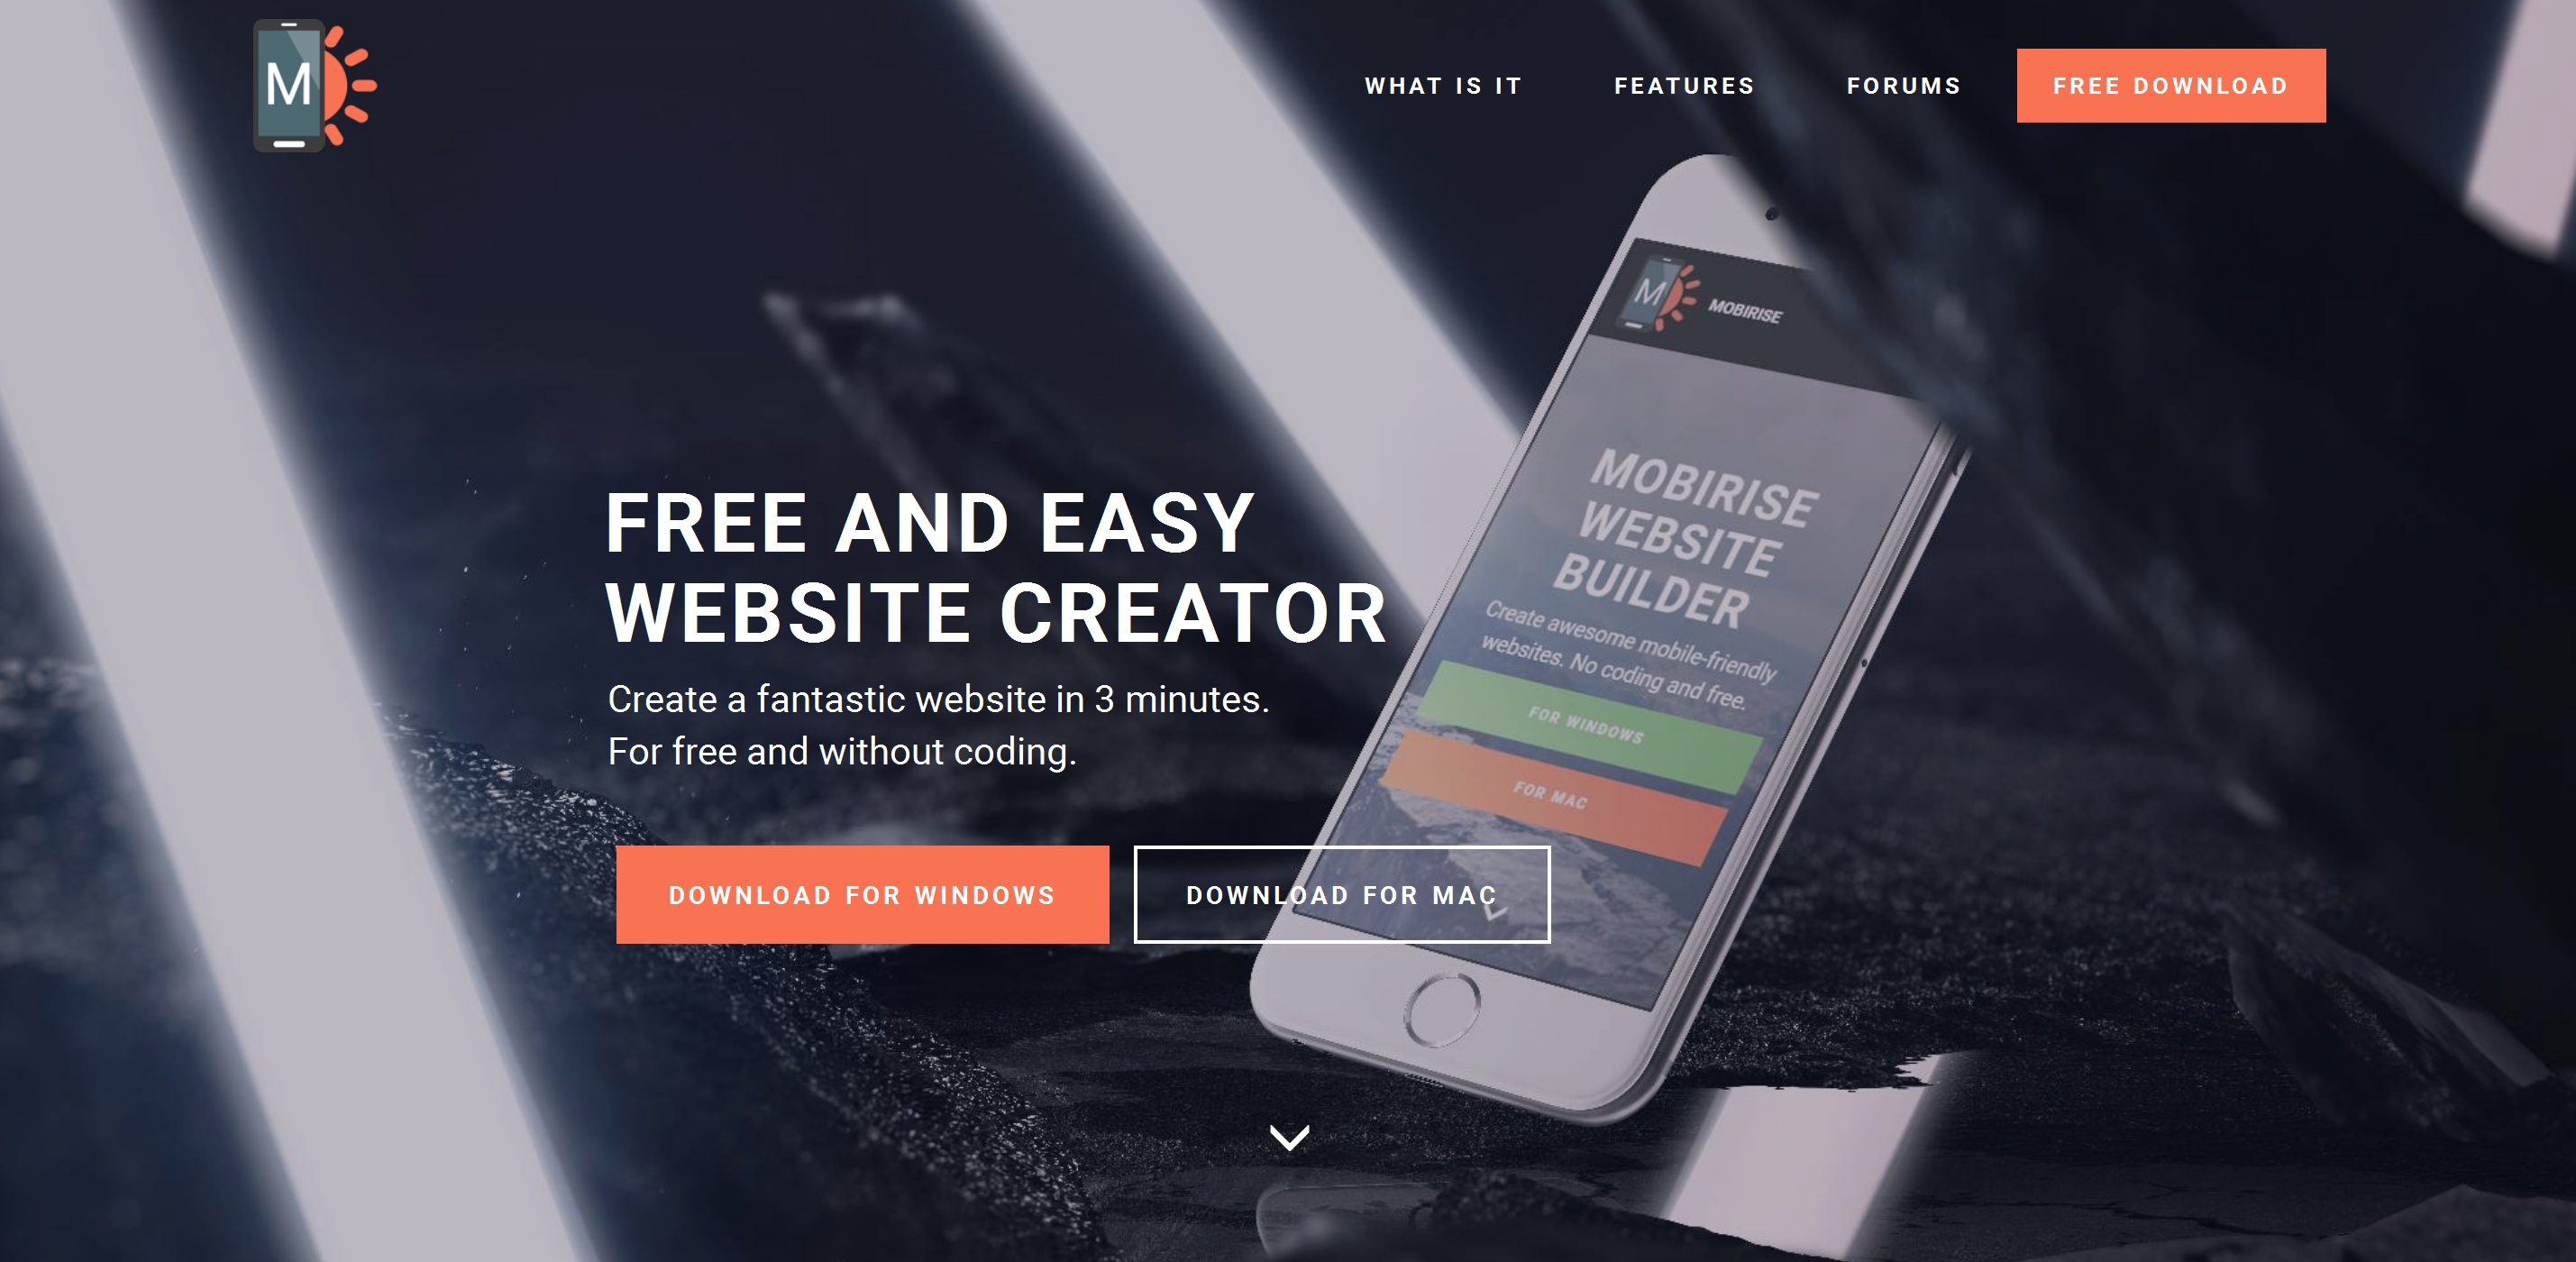 Mobile Simple Website Creator Review